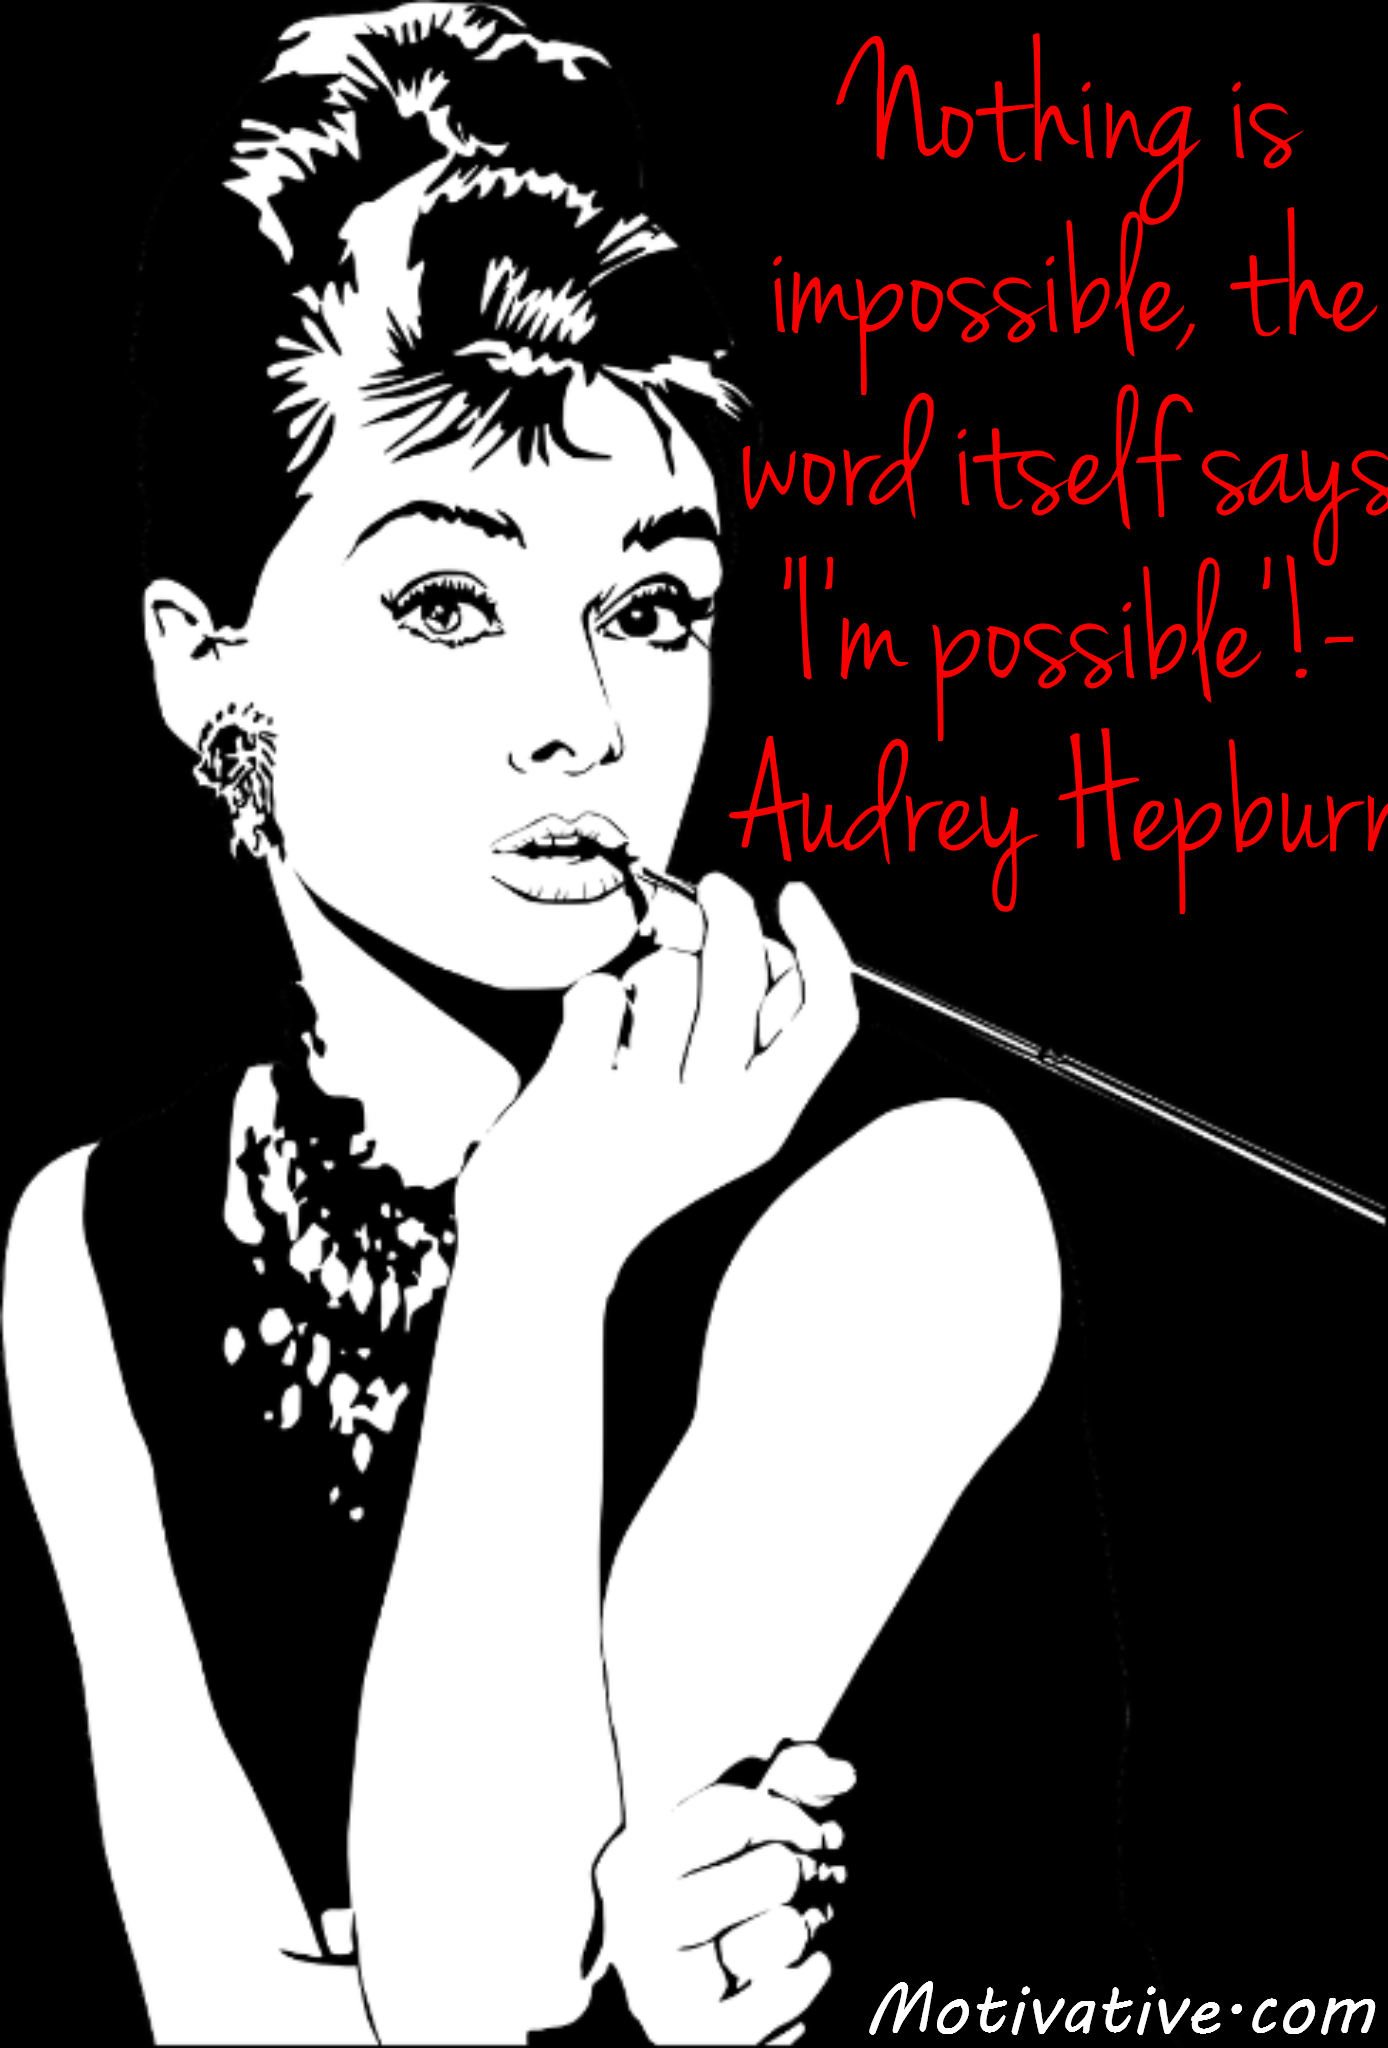 Nothing is impossible, the word itself says ‘I’m possible’! – Audrey Hepburn